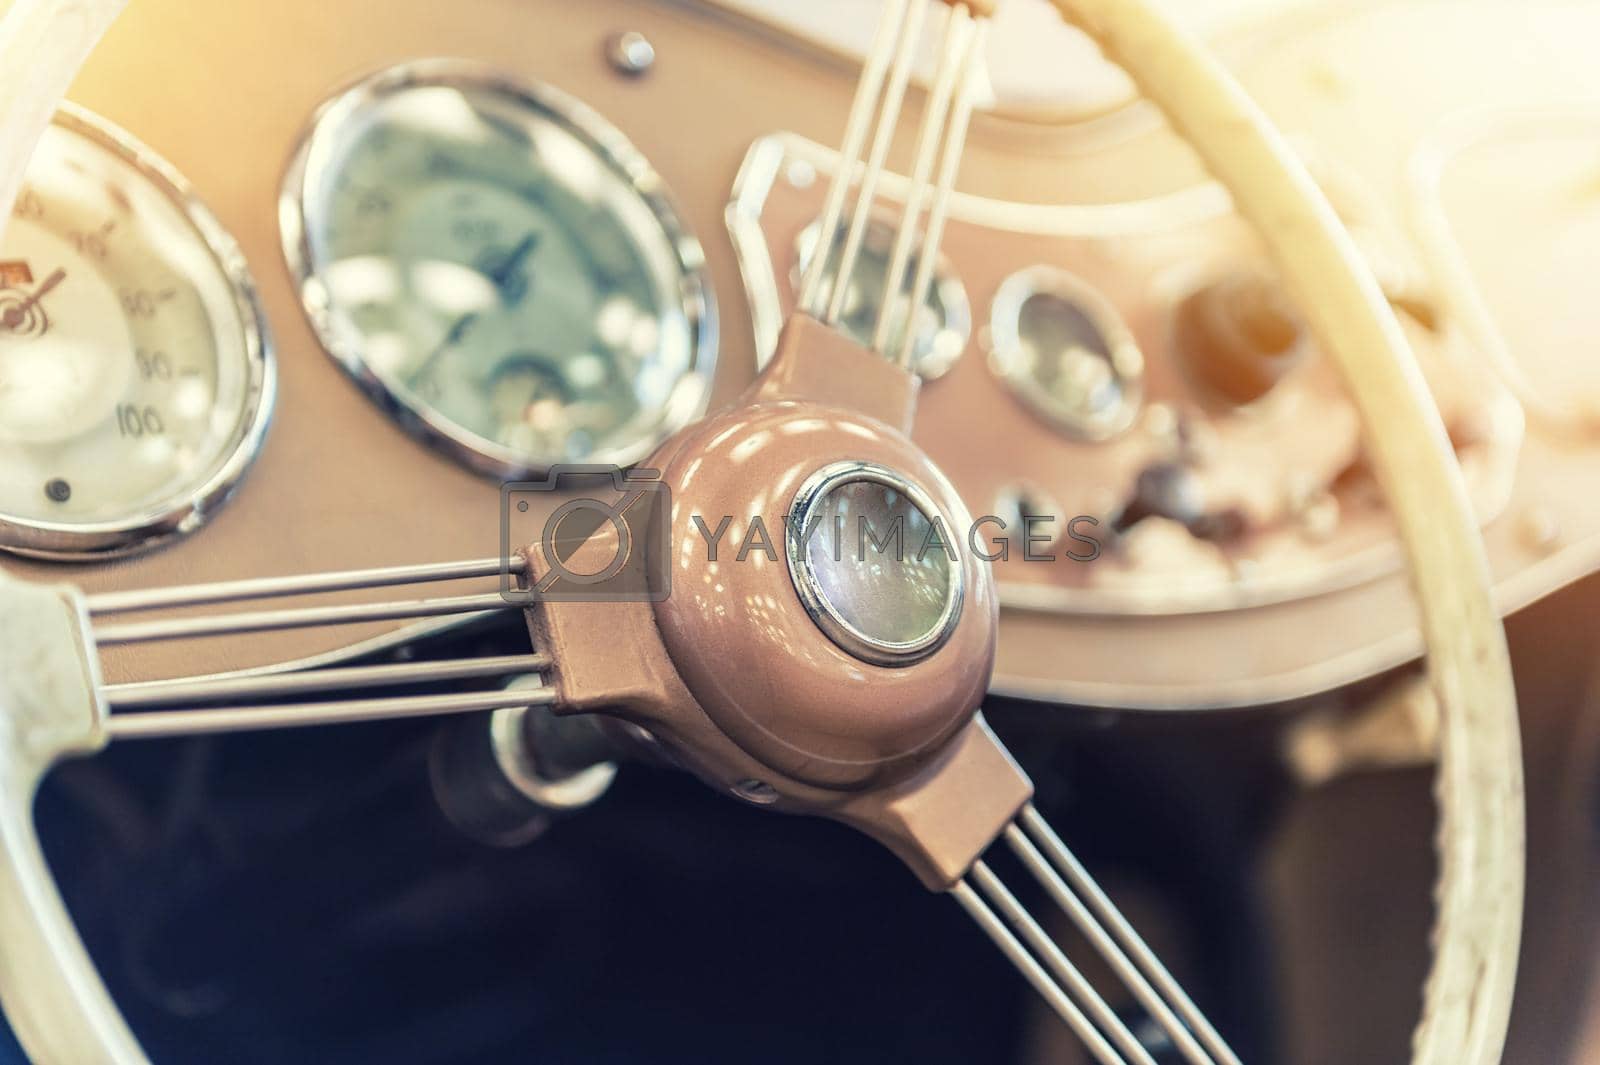 Royalty free image of Closeup on a vintage dashboard by cla78